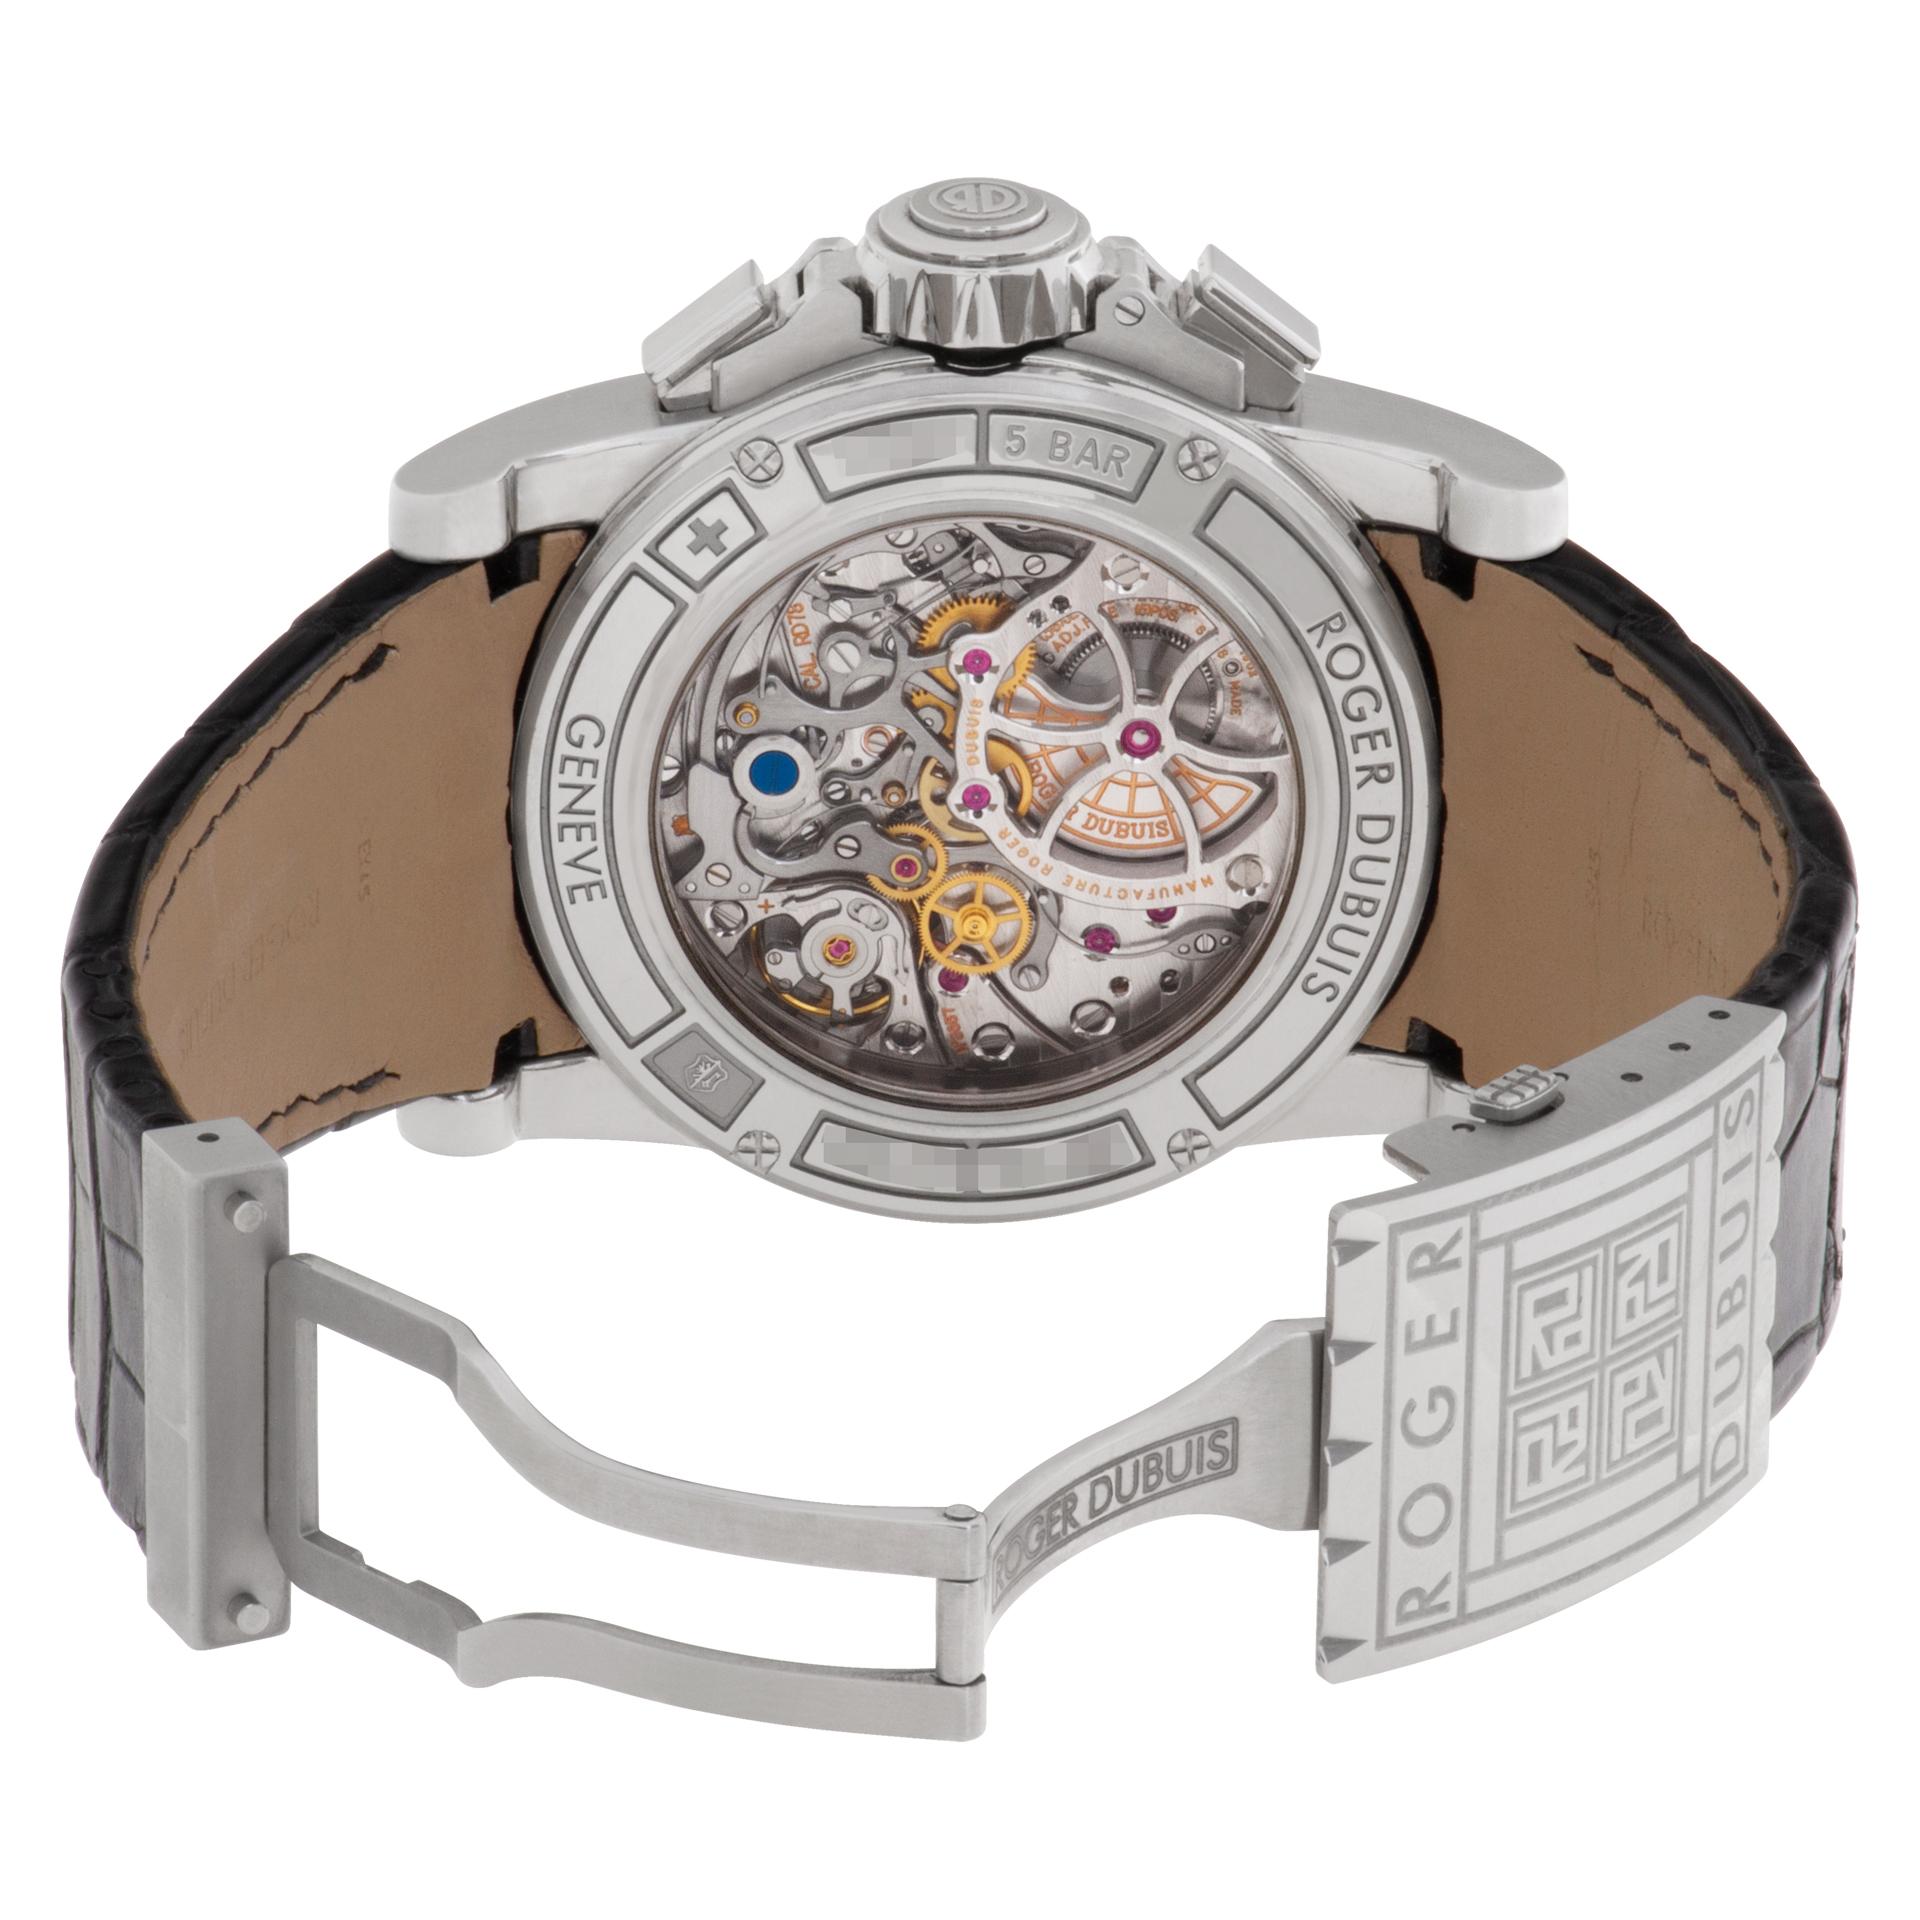 Men's Roger Dubuis Excalibur Chronograph in Stainless Steel Wristwatch Ref.  